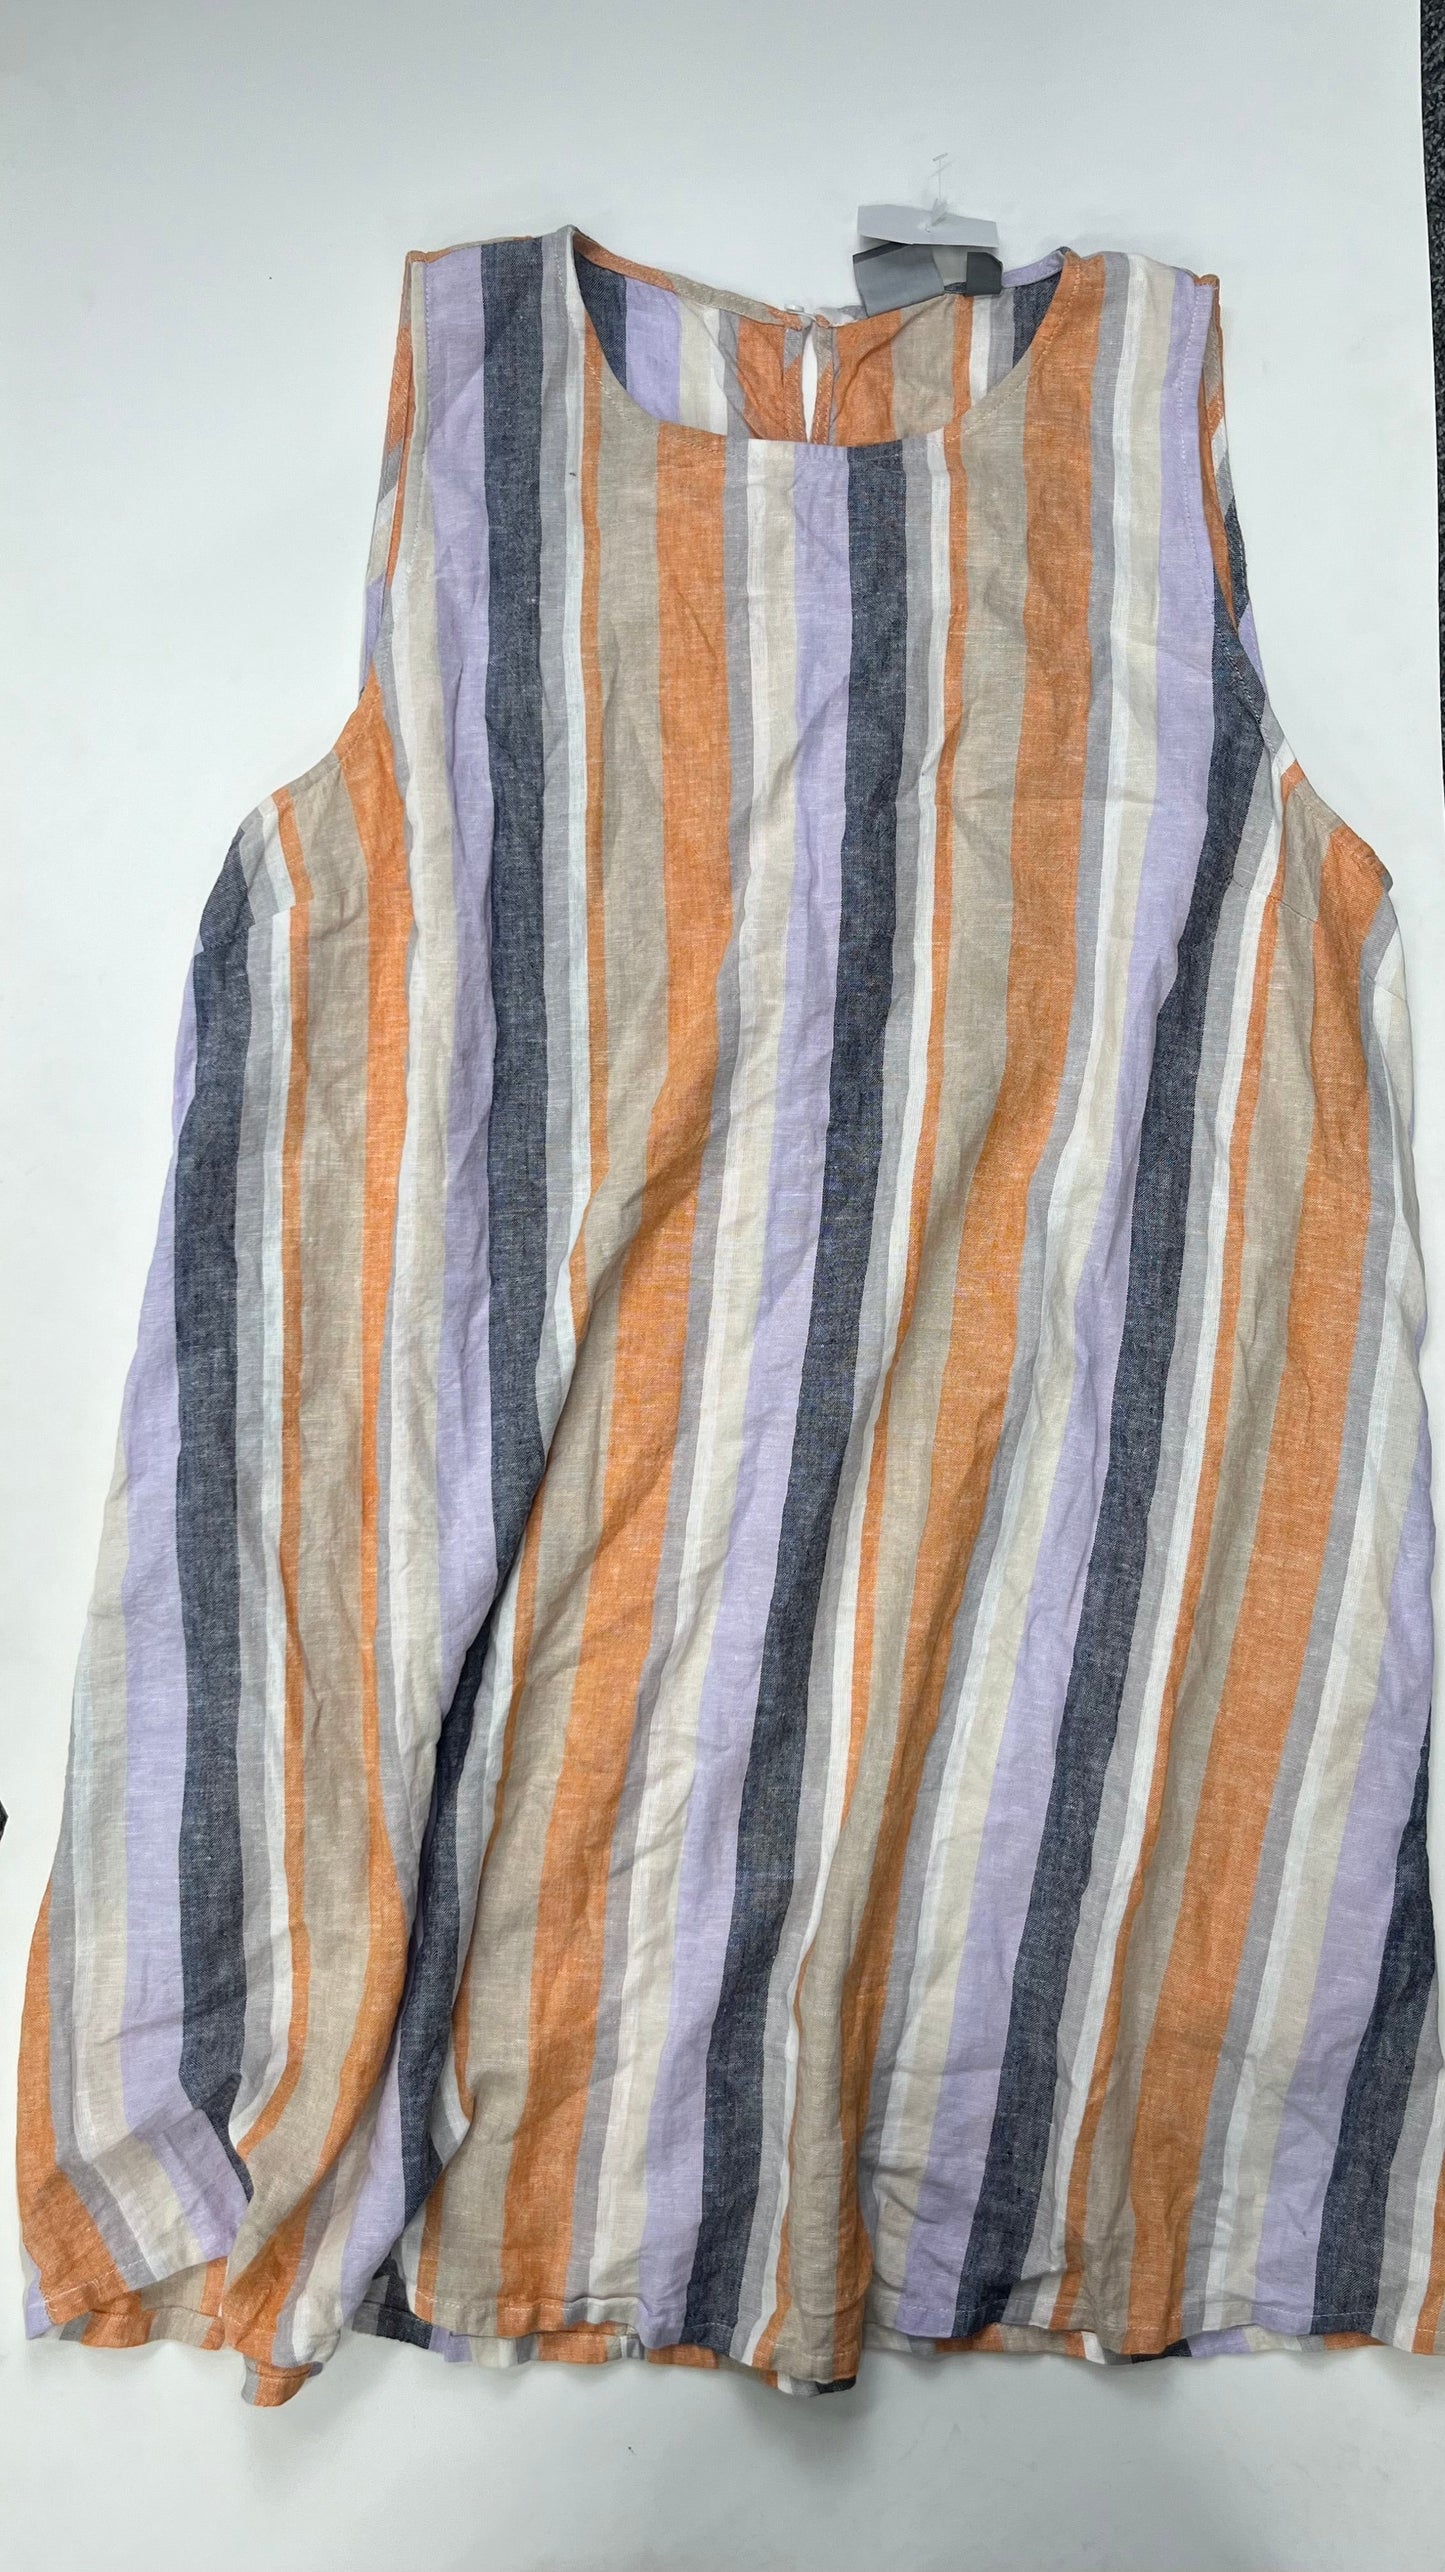 Striped Dress Casual Midi New York And Co, Size 2x